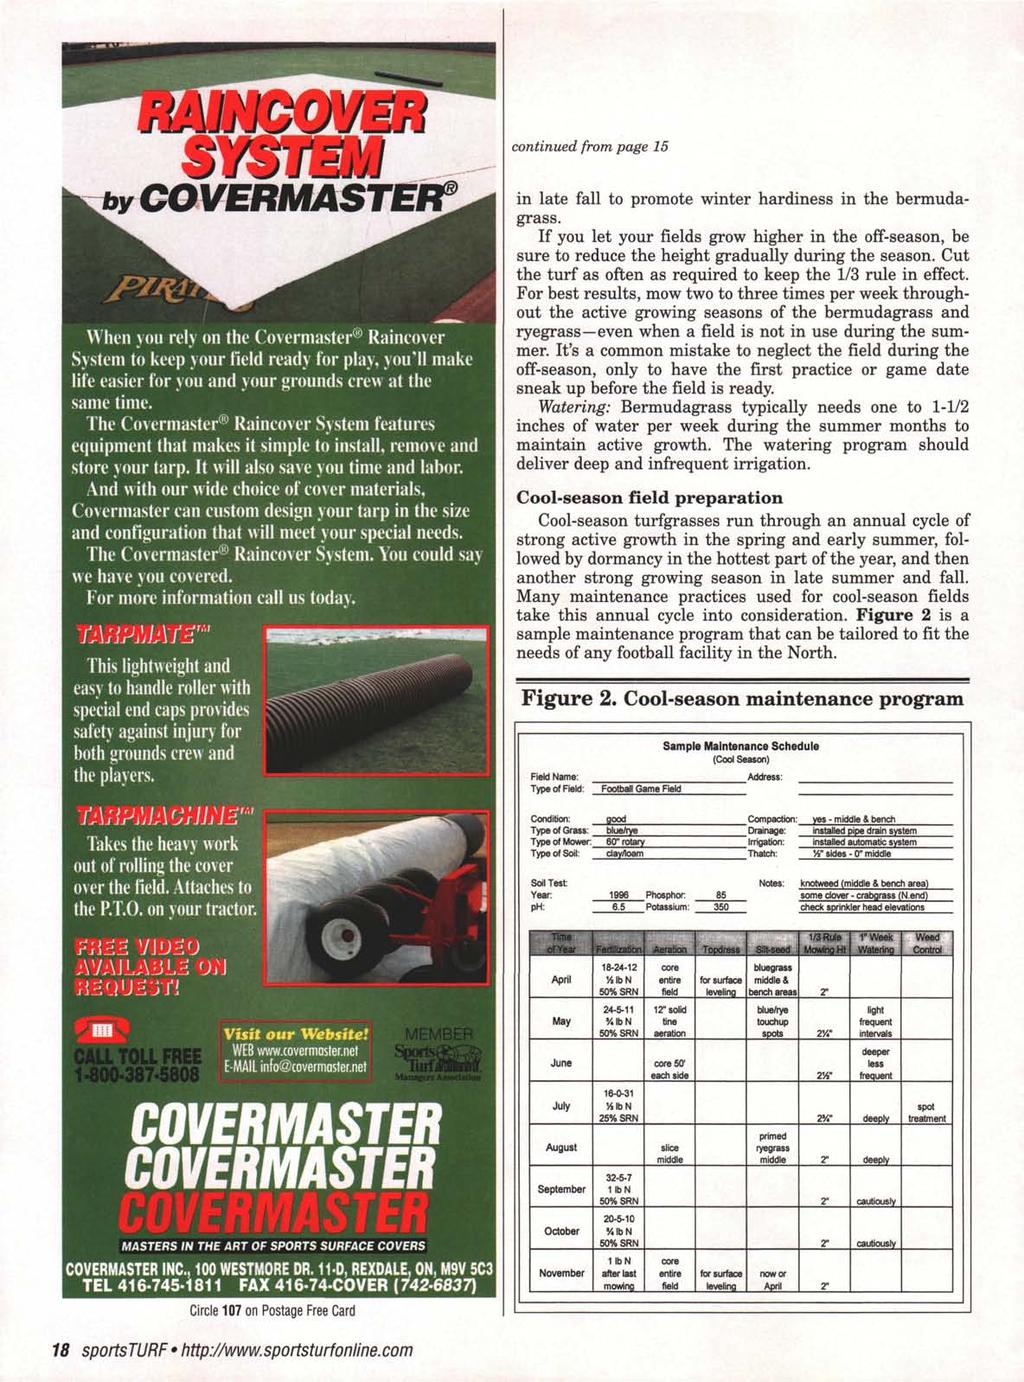 COVERMASTER: When you rely on (he Covermaster Raincover System to keep your field ready for play, you Ml make life easier for you and your grounds crew at the same time.